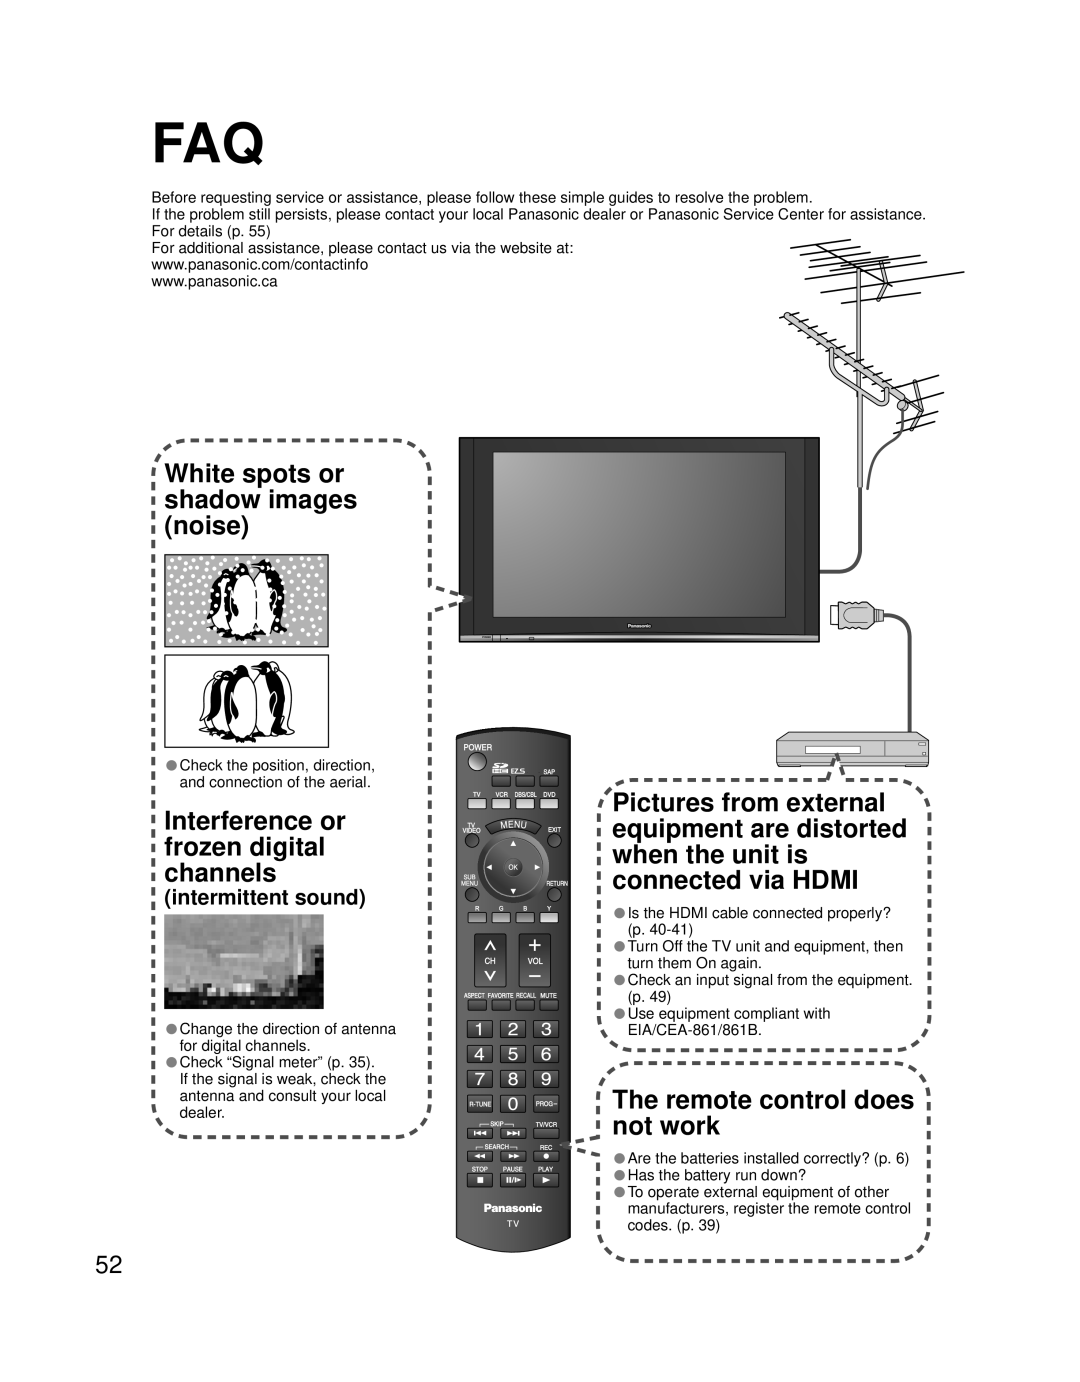 Panasonic TQB2AA0756 intermittent sound, White spots or shadow images noise, Interference or frozen digital channels 